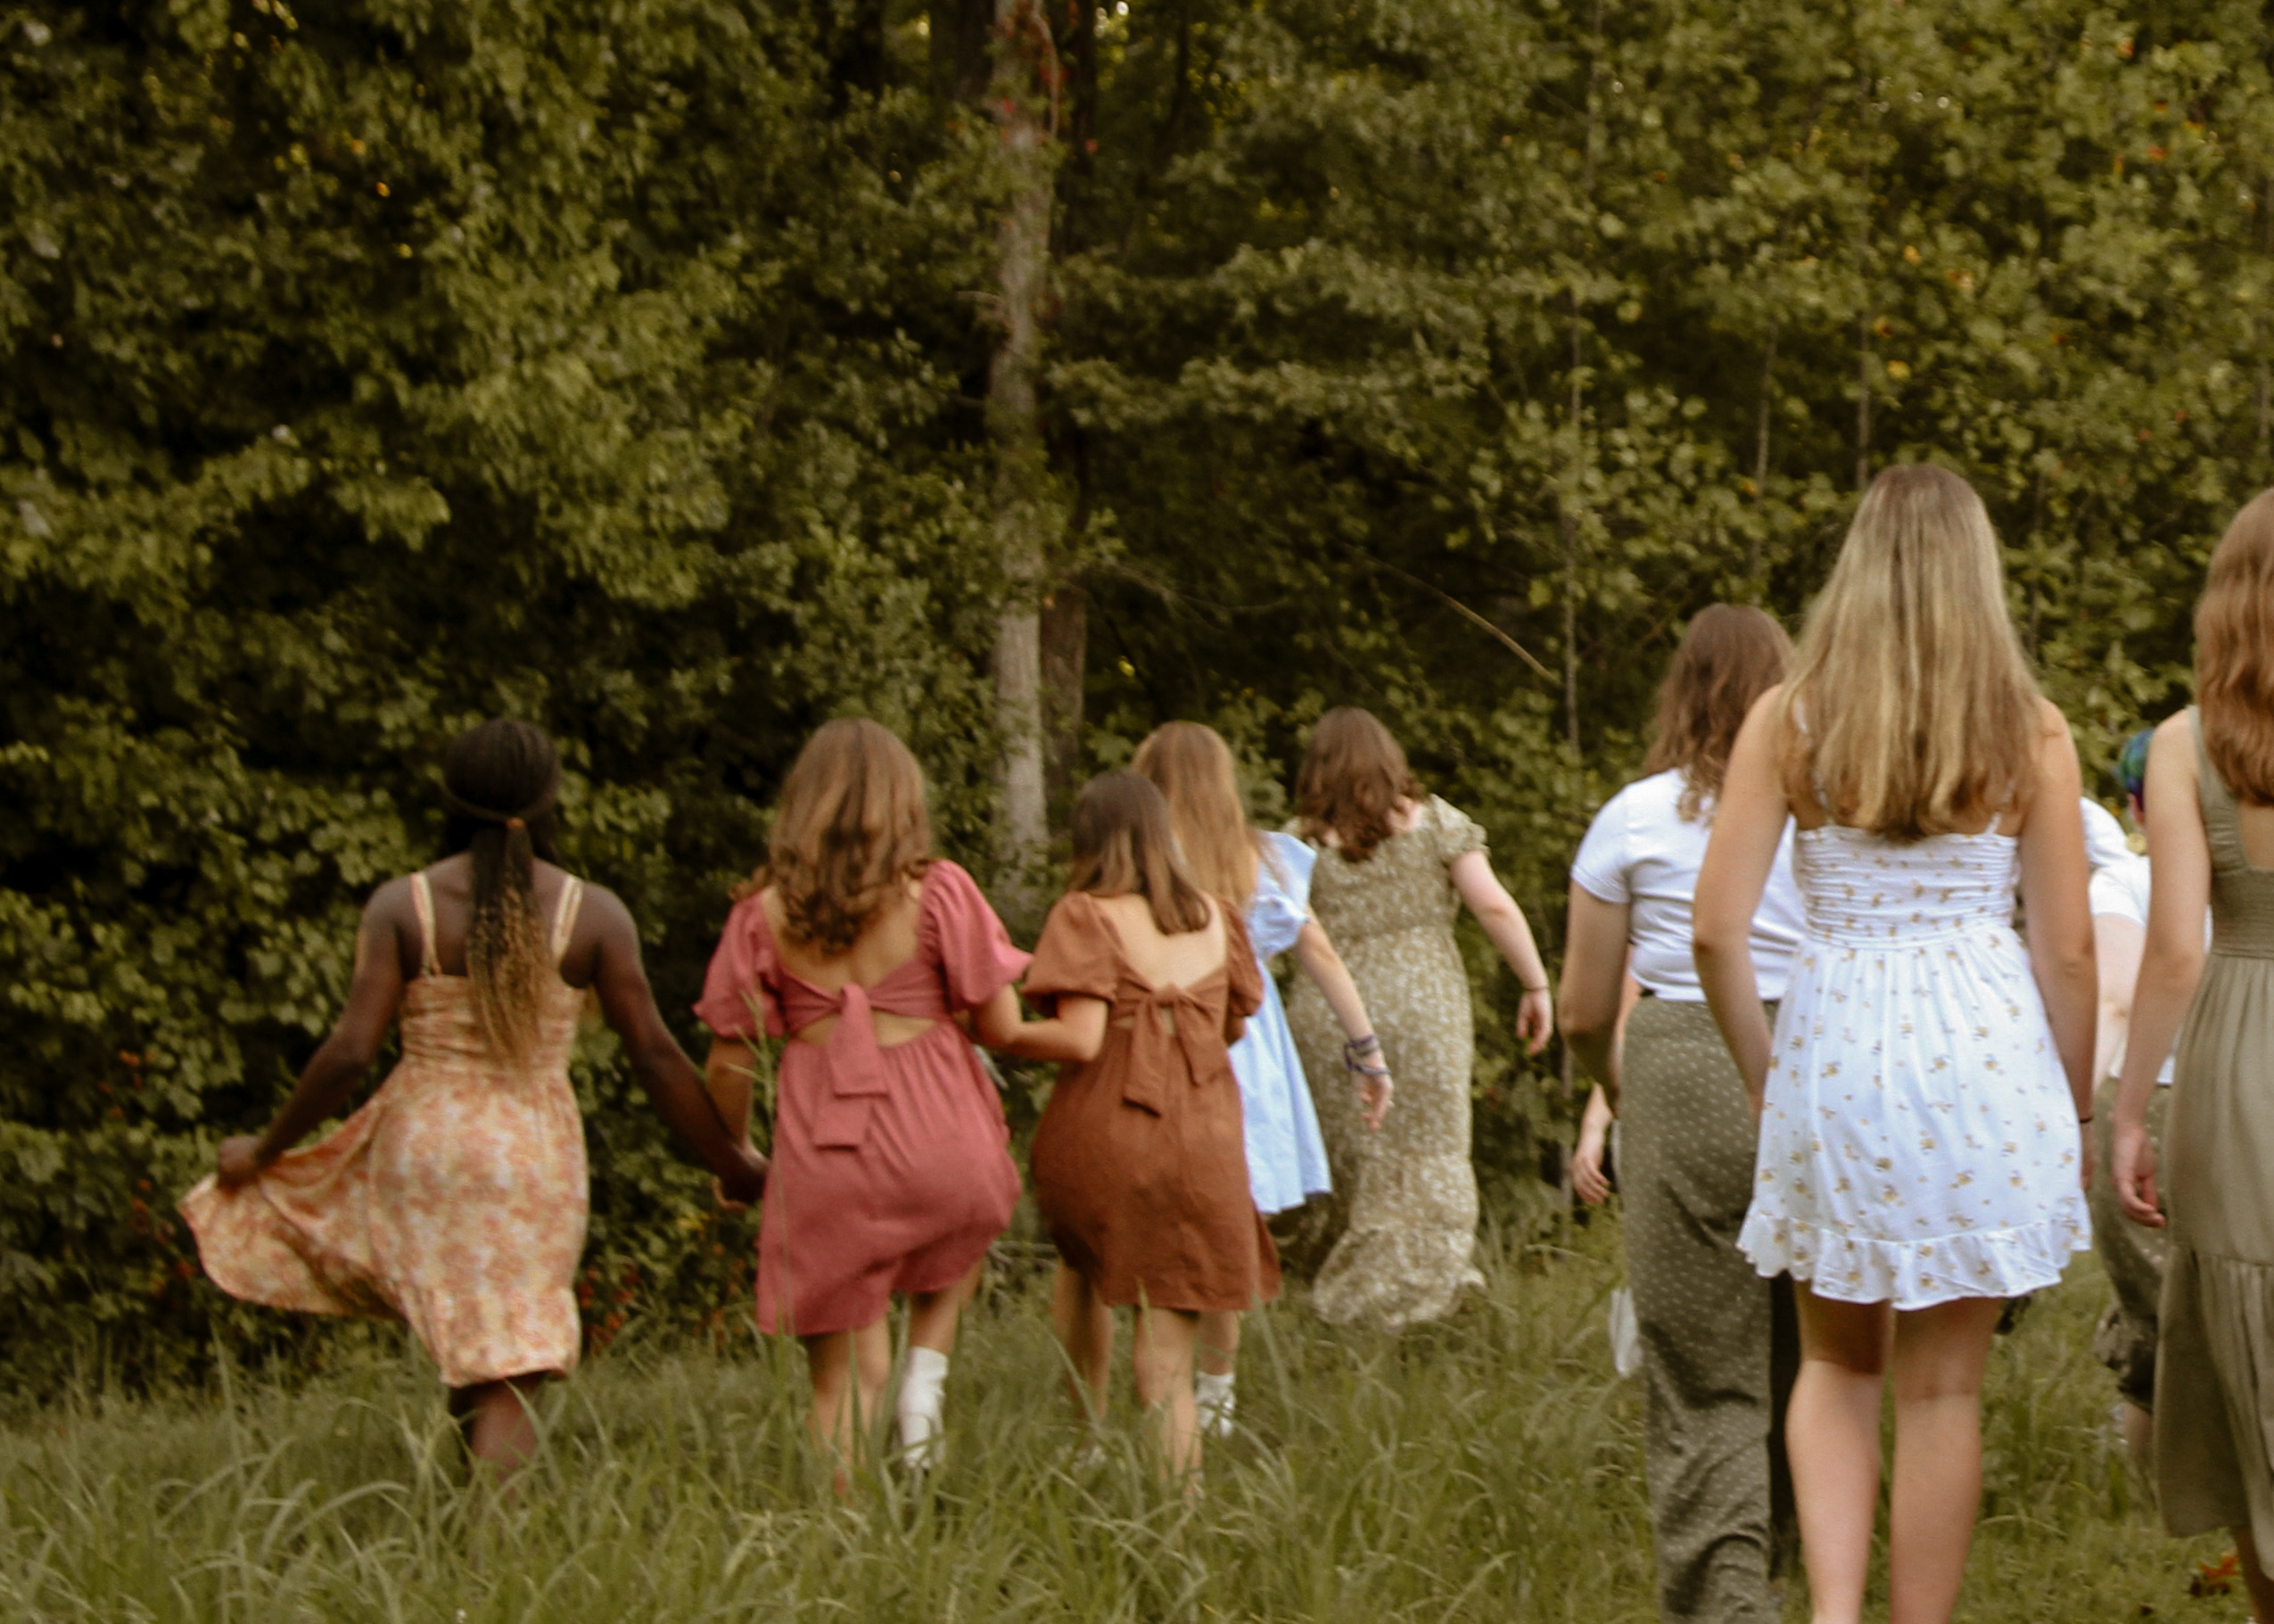 Females walking toward a tree line in tall grass away from the camera